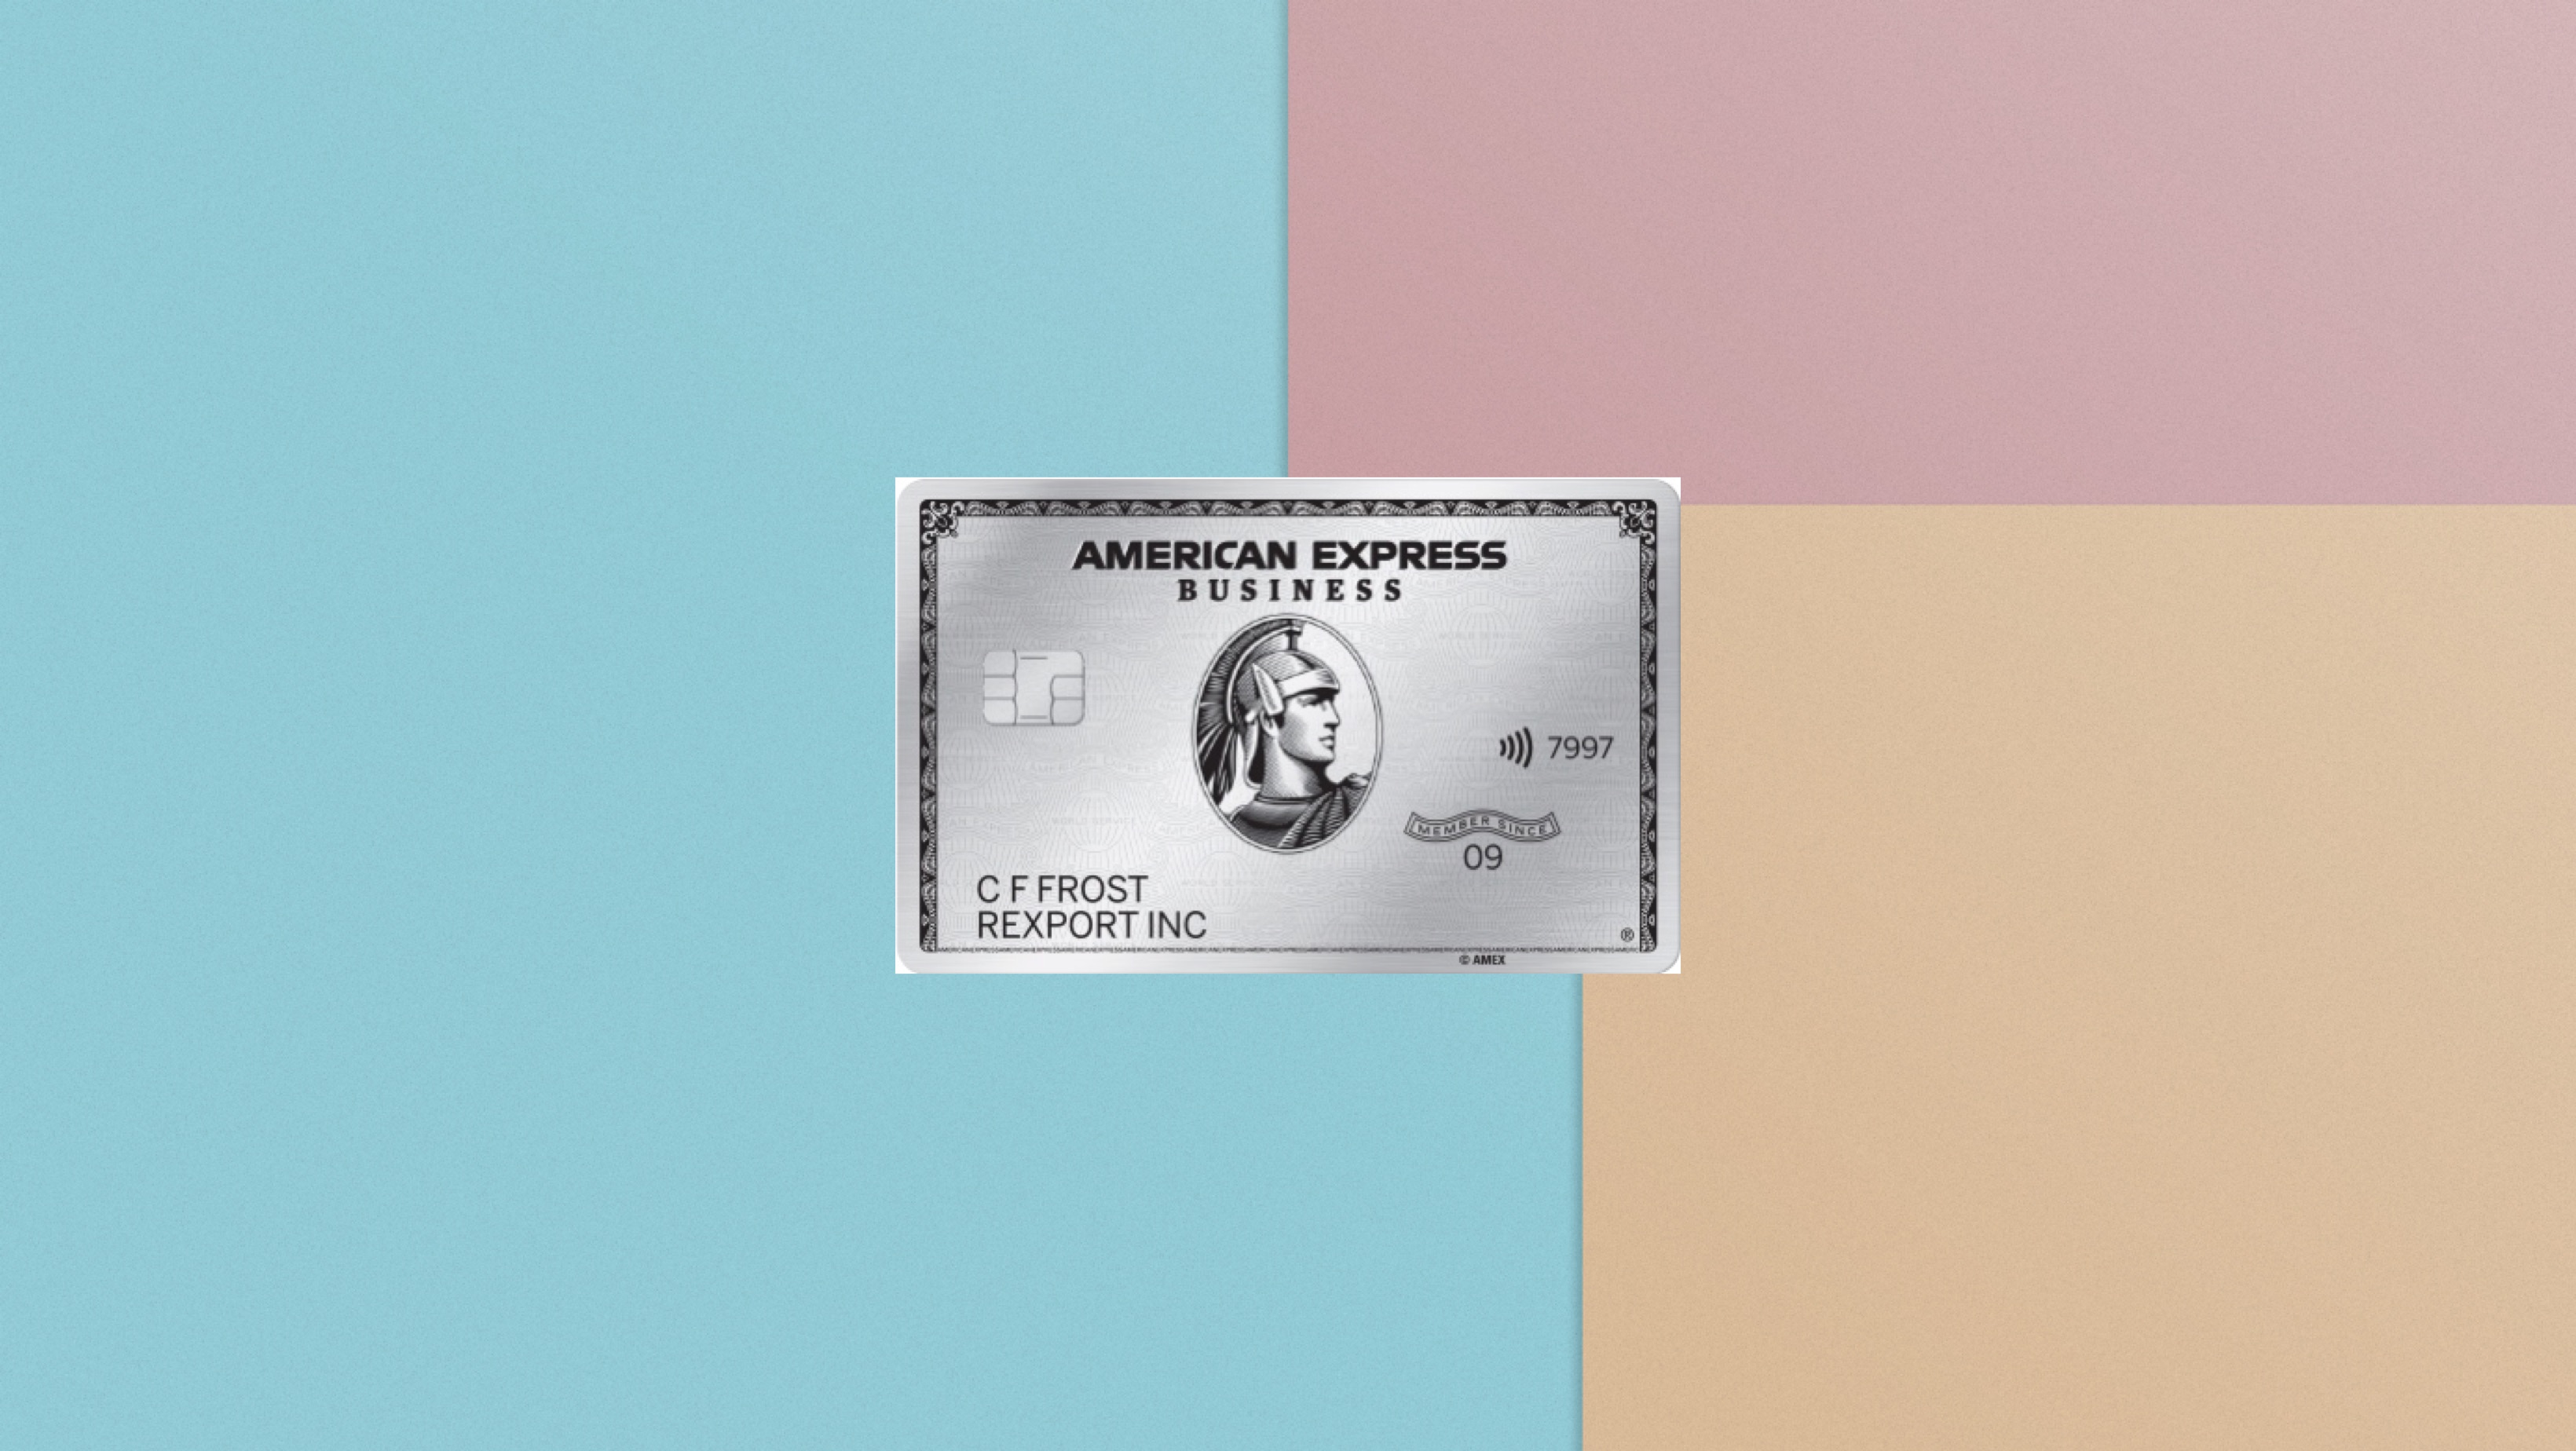 The American Express® Business Platinum Card